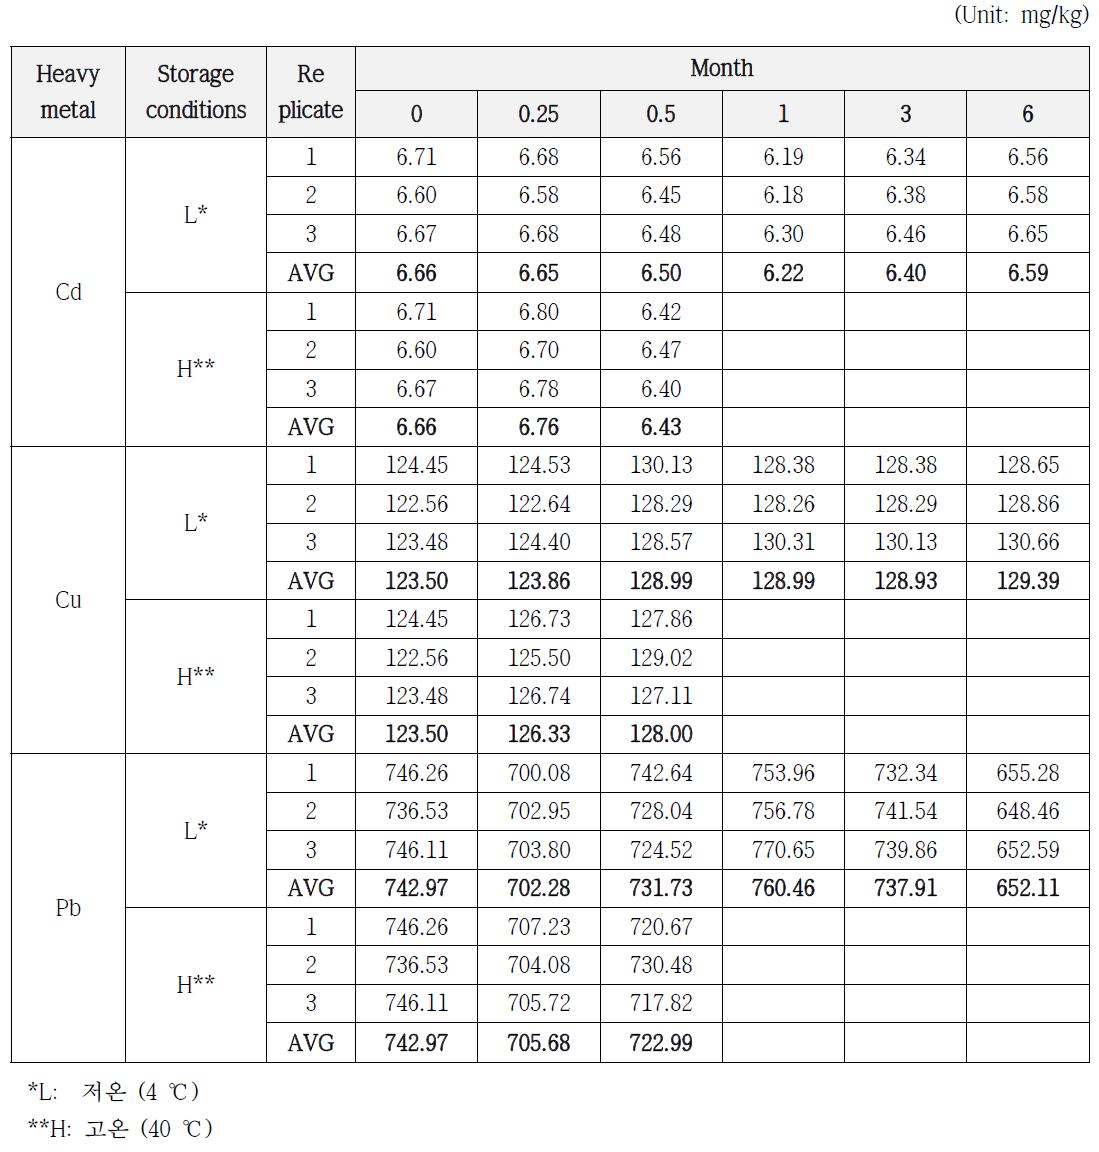 Result of stability study for Cadmium, Copper and Lead in soil PTMs of Metal-Ⅱ